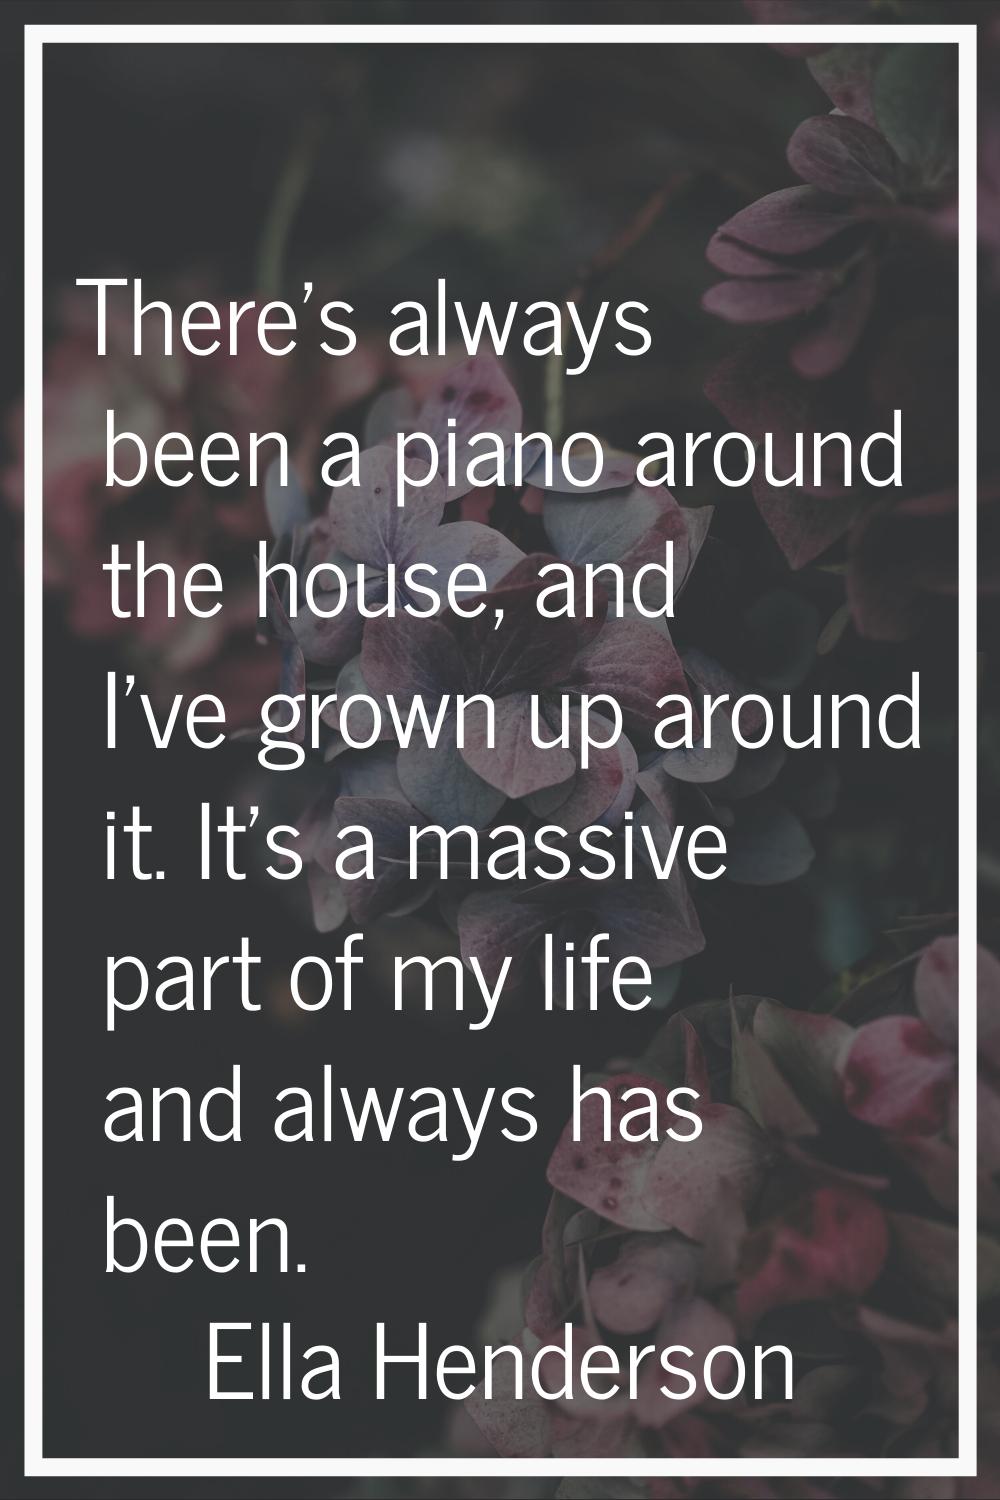 There's always been a piano around the house, and I've grown up around it. It's a massive part of m